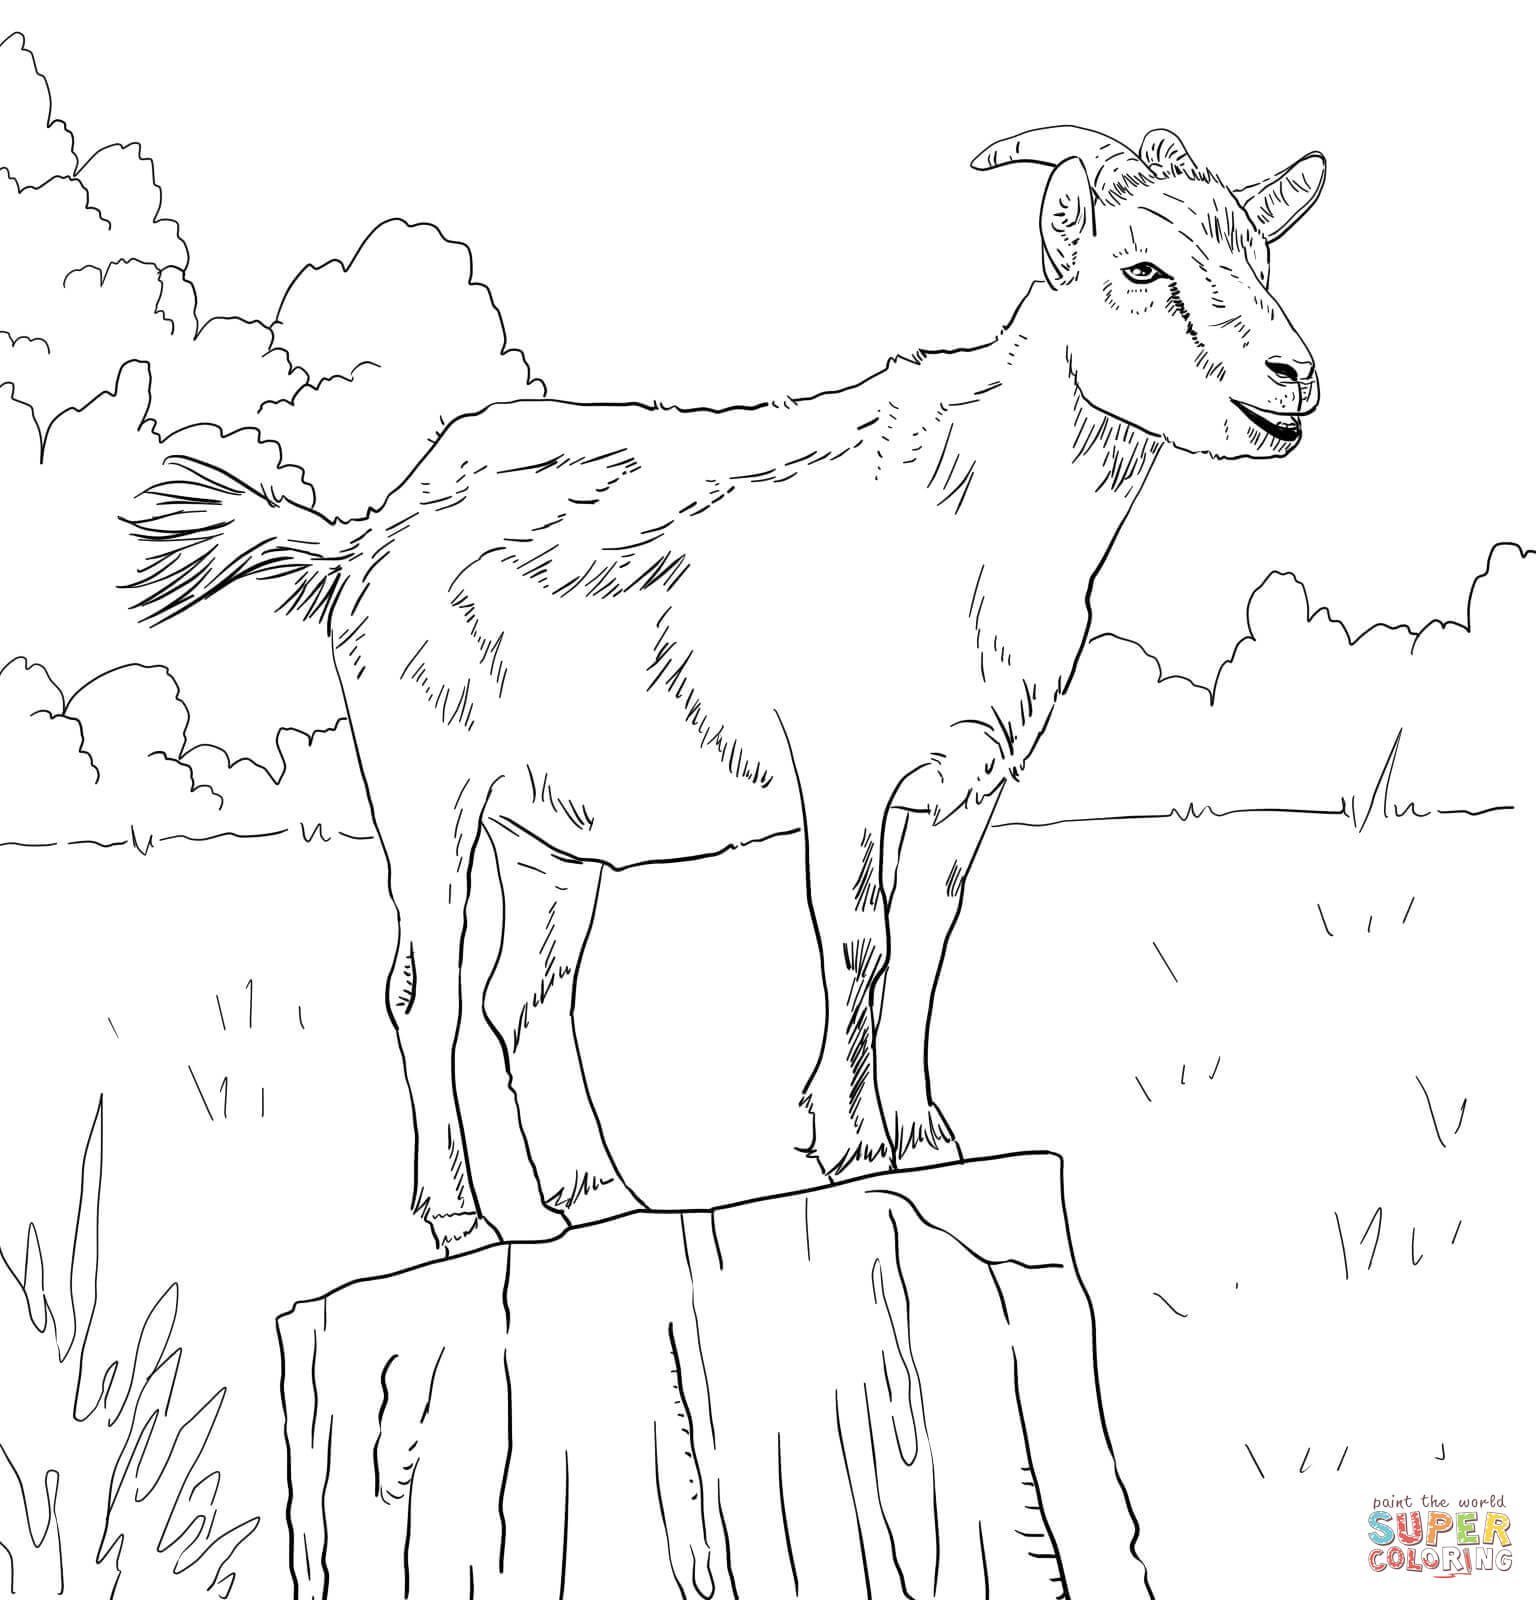 Domestic Goat coloring pages | Free Coloring Pages